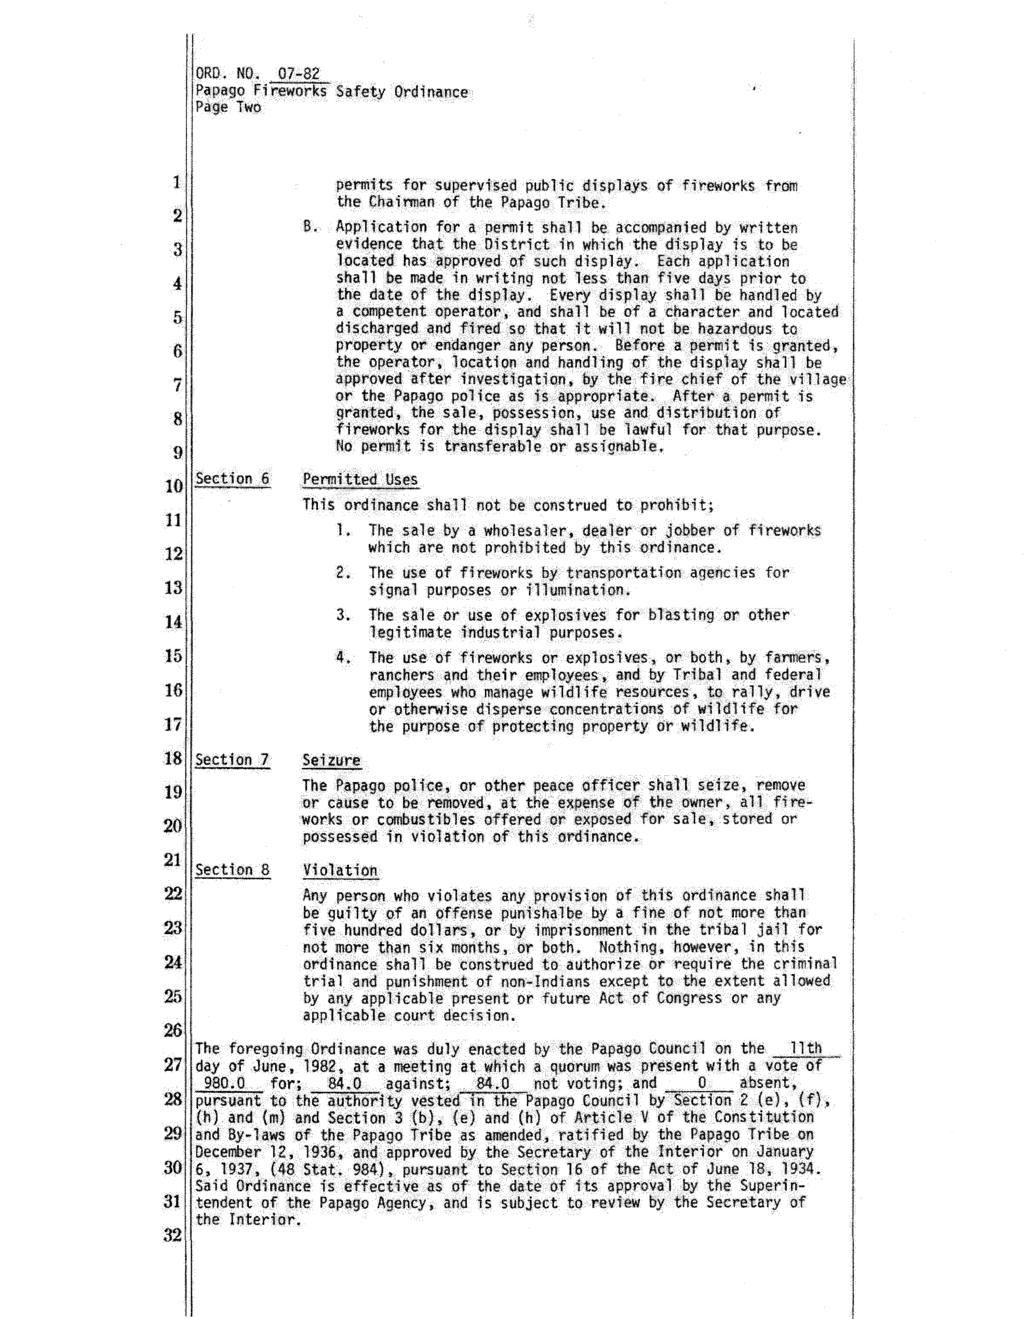 I lord. NO. 07-8 IPapago Fireworks Safety Ordinance Page Two l 3 4 5 6 7 8 Section 6 permits for supervised public displays of fireworks froot the Chairman of the Papago Tribe. B.